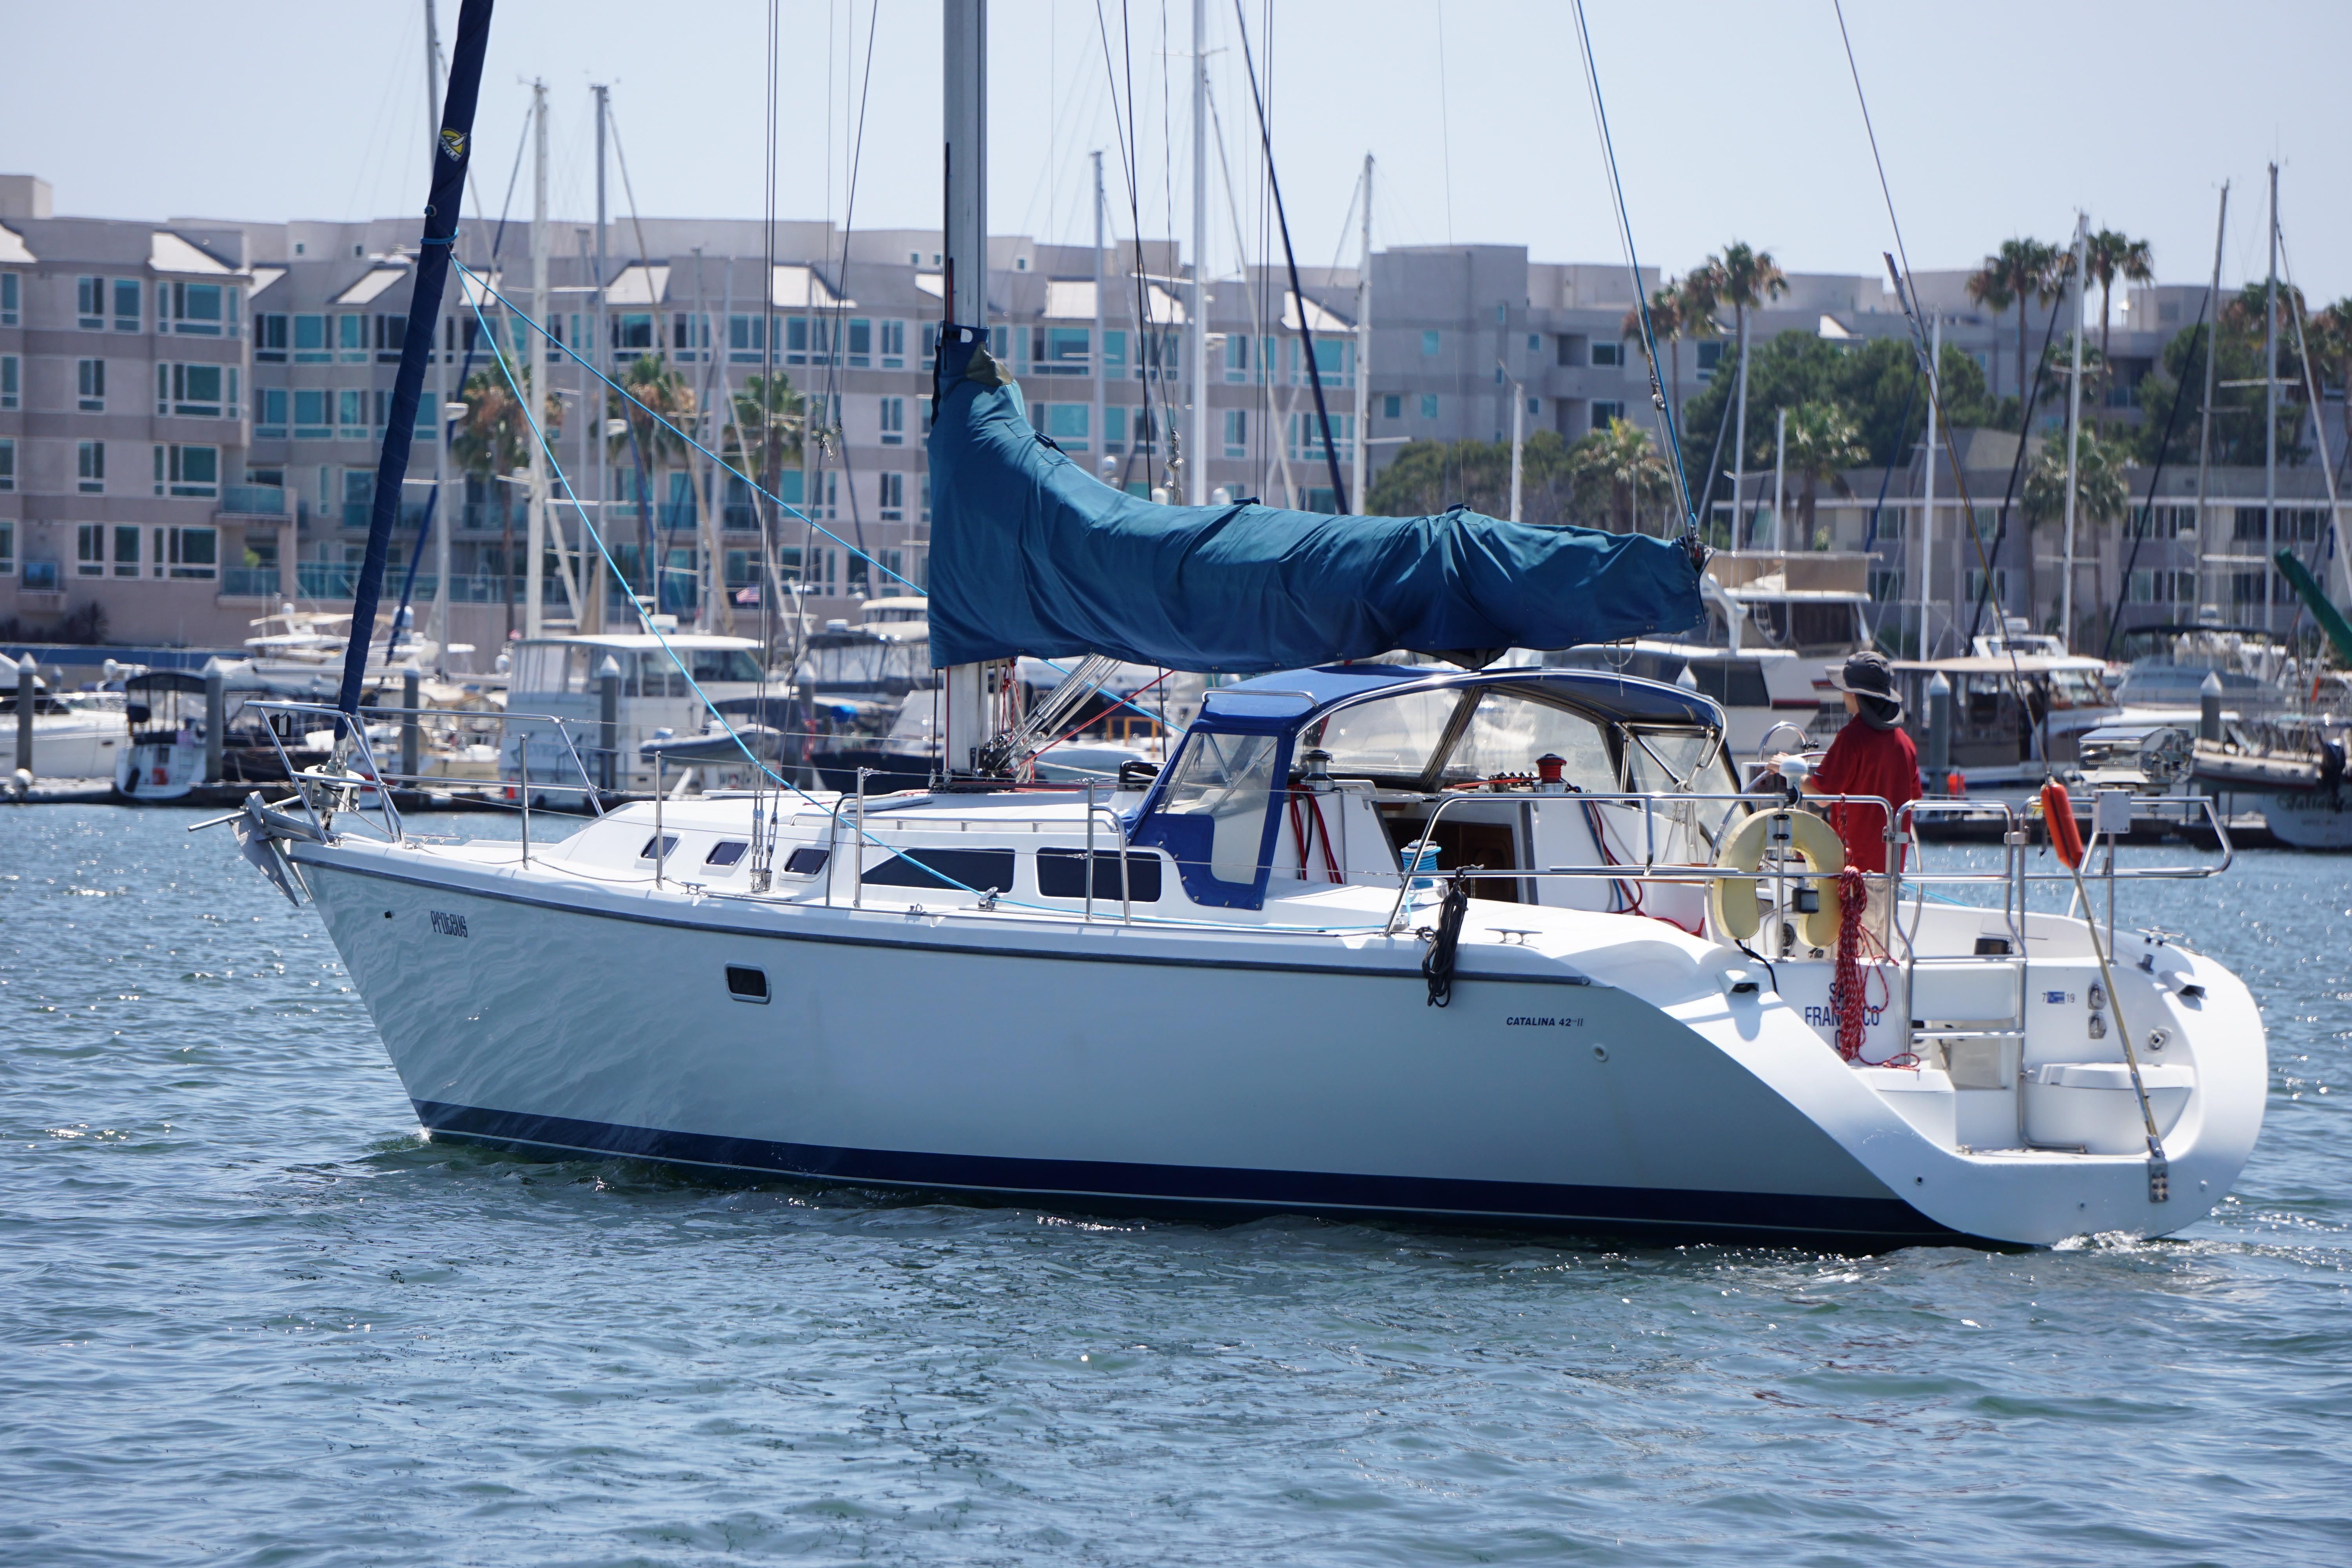 42 catalina sailboat for sale